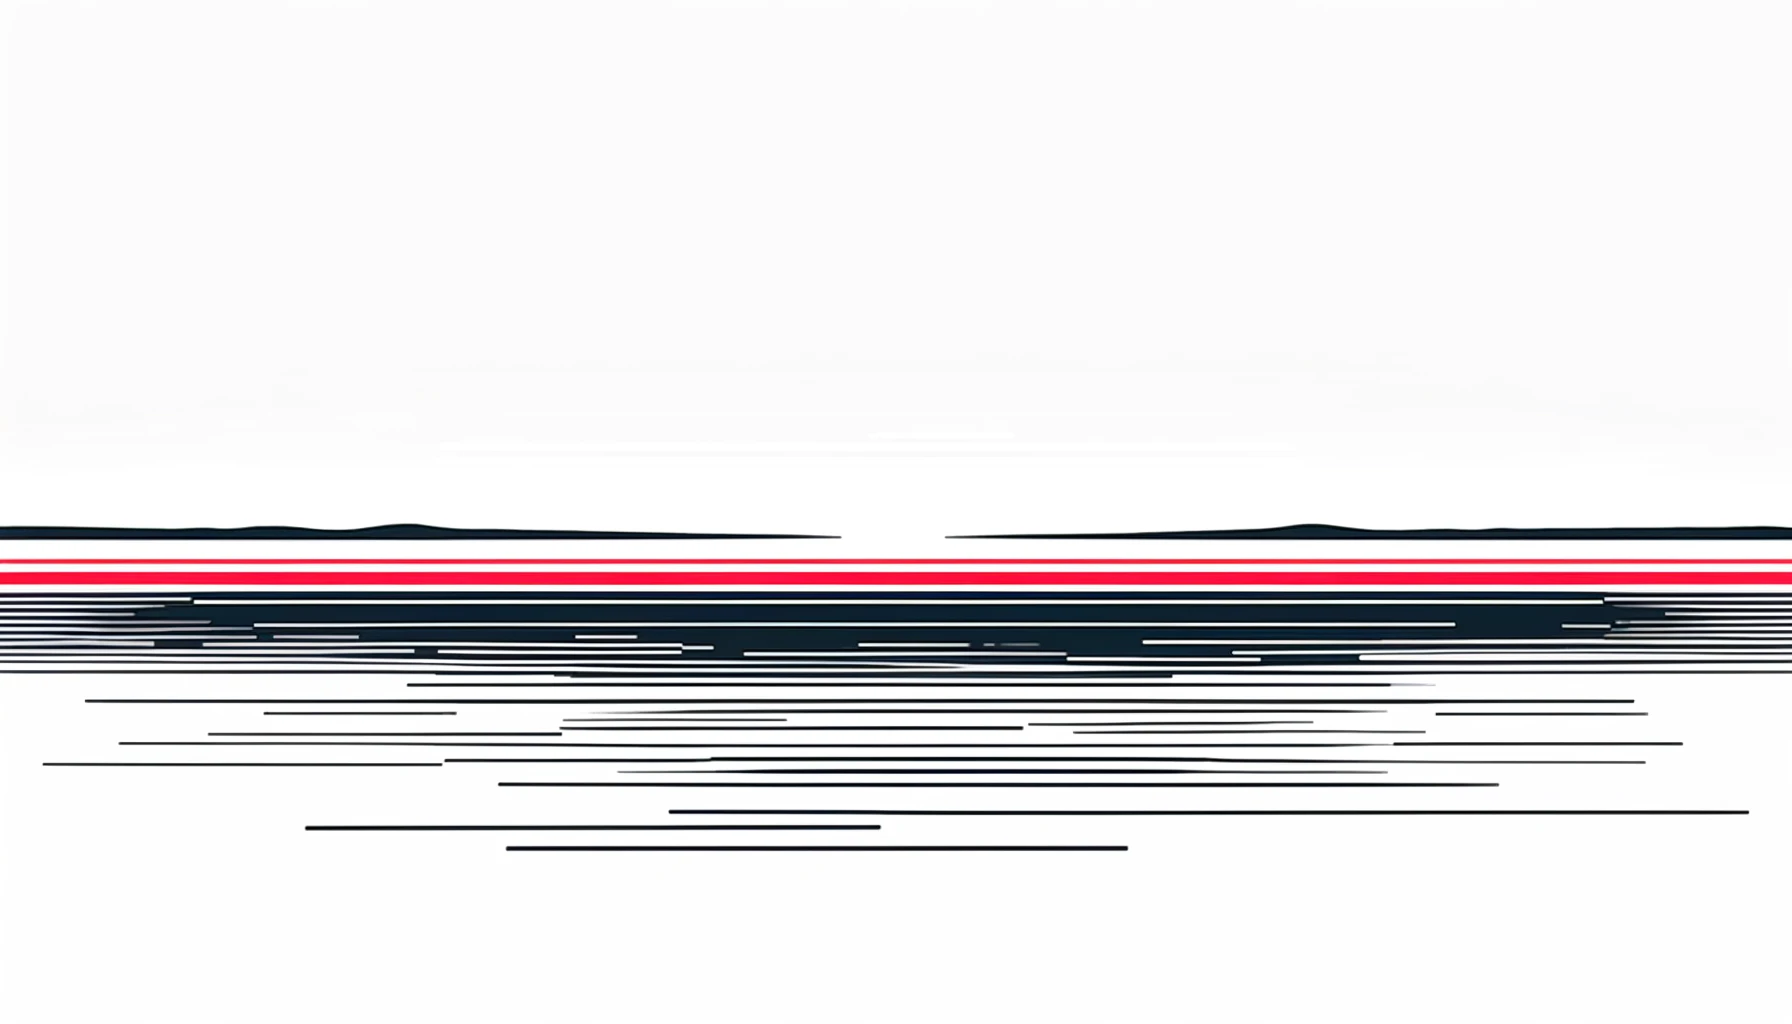 Abstract representation of flat land with bold horizontal black and red strokes on a completely white background, emphasizing simplicity and expansiveness.